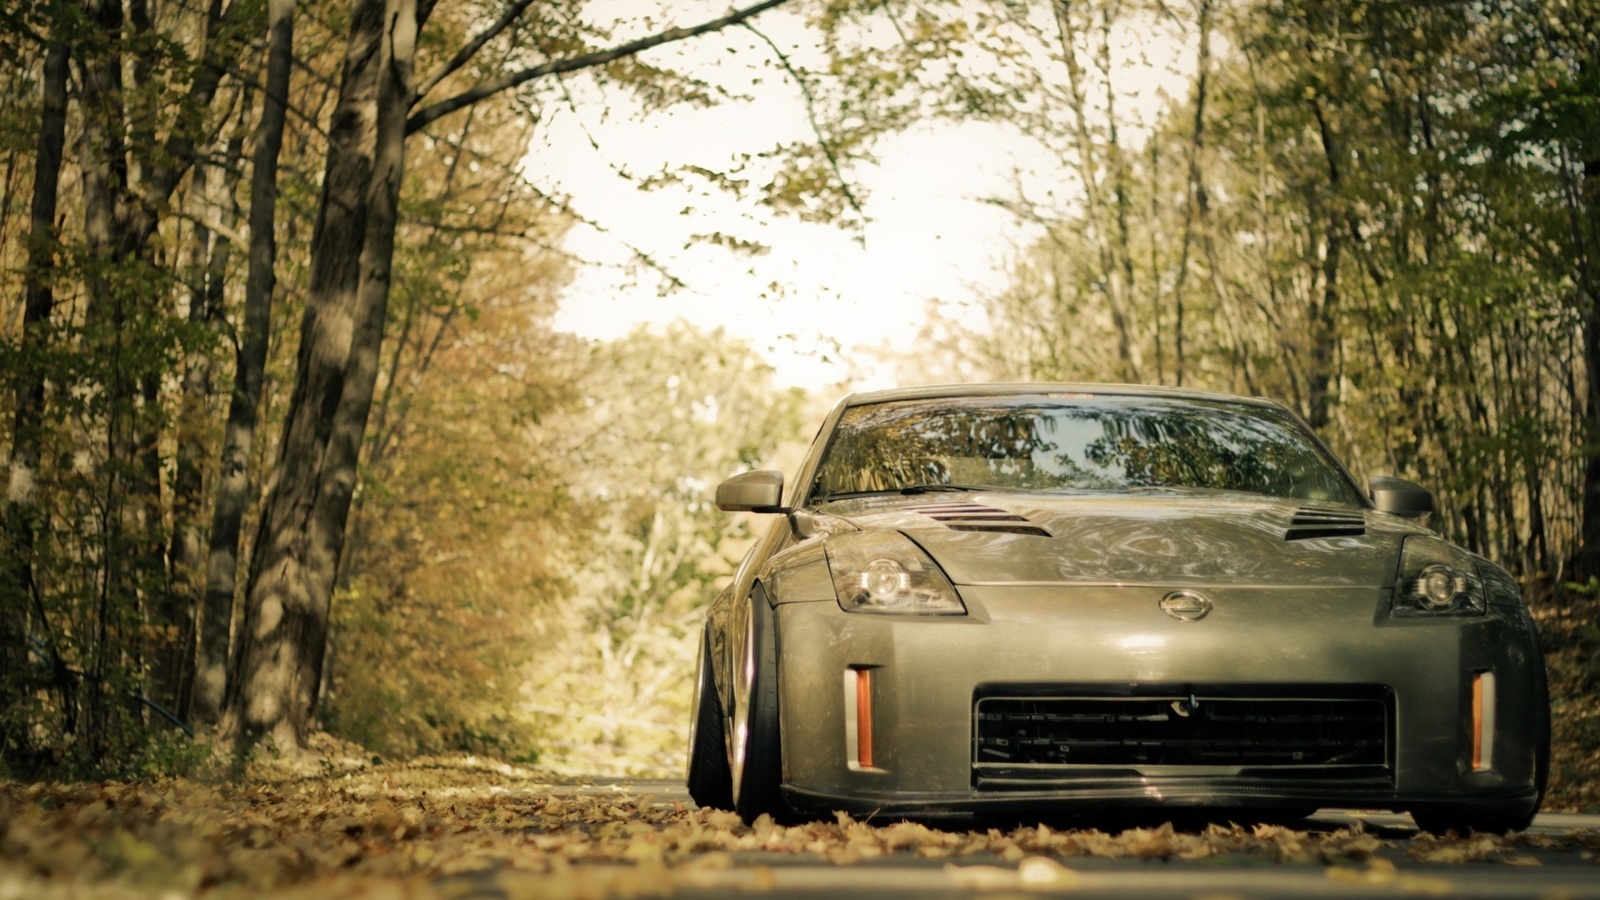 nissan, fairlady, forest, leaves